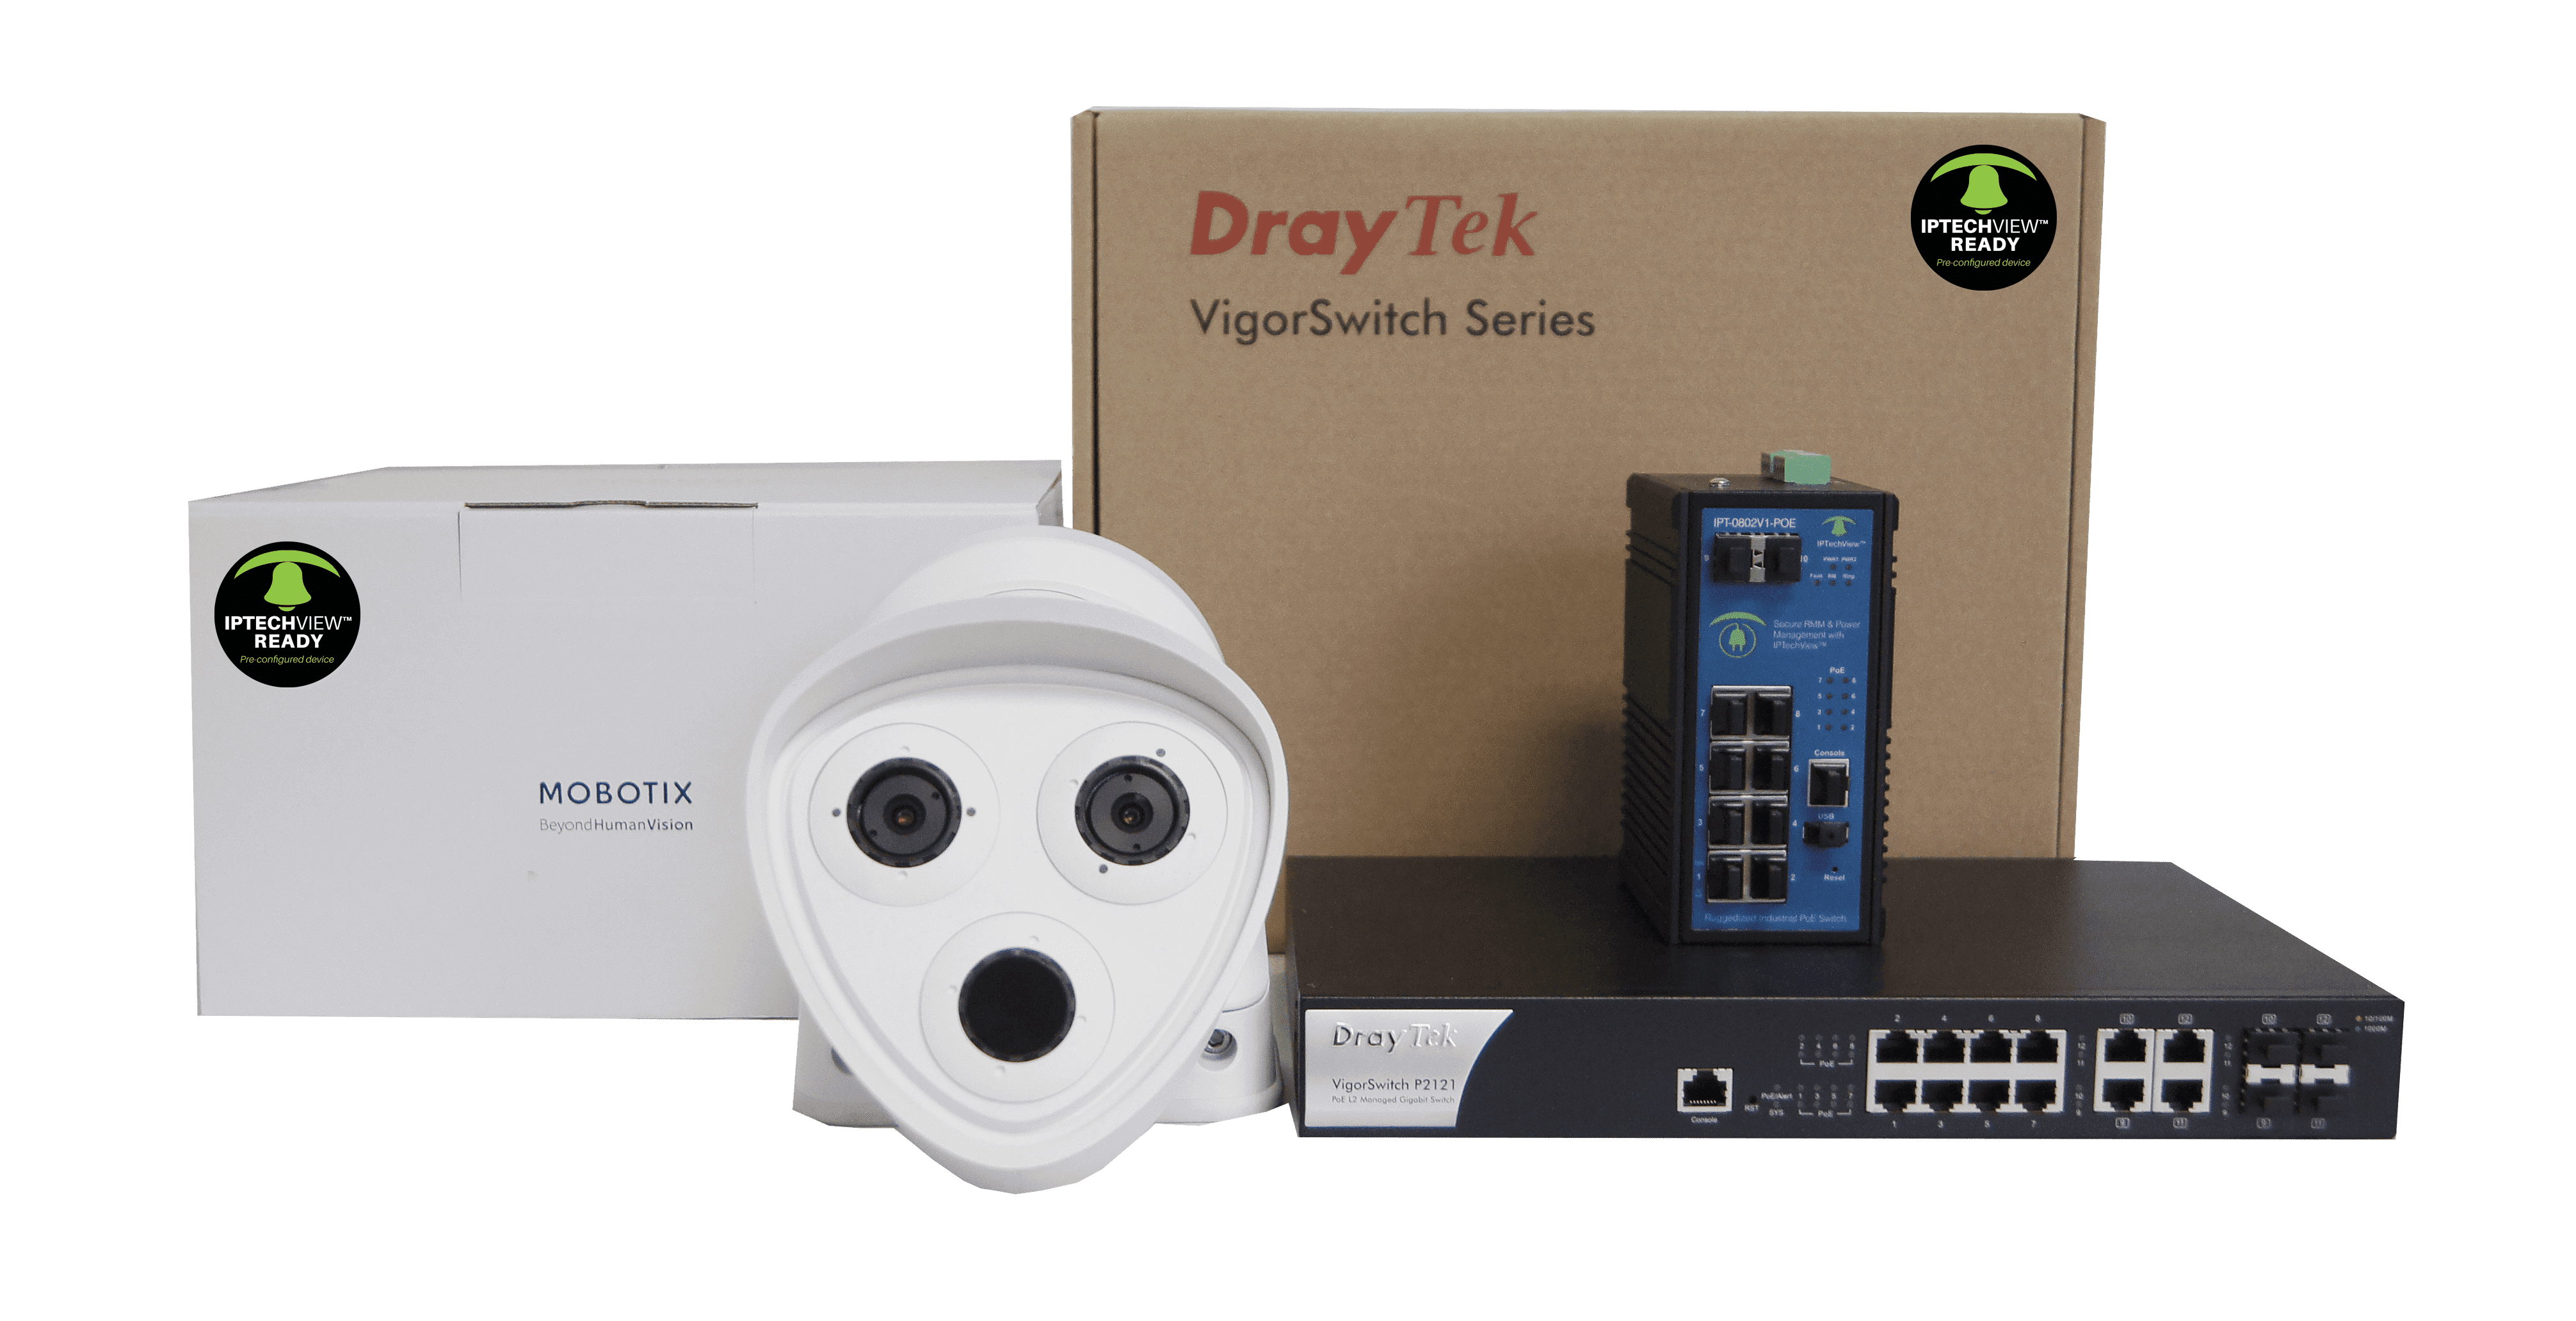 cloud-ready and pre-provisioned switches and cameras